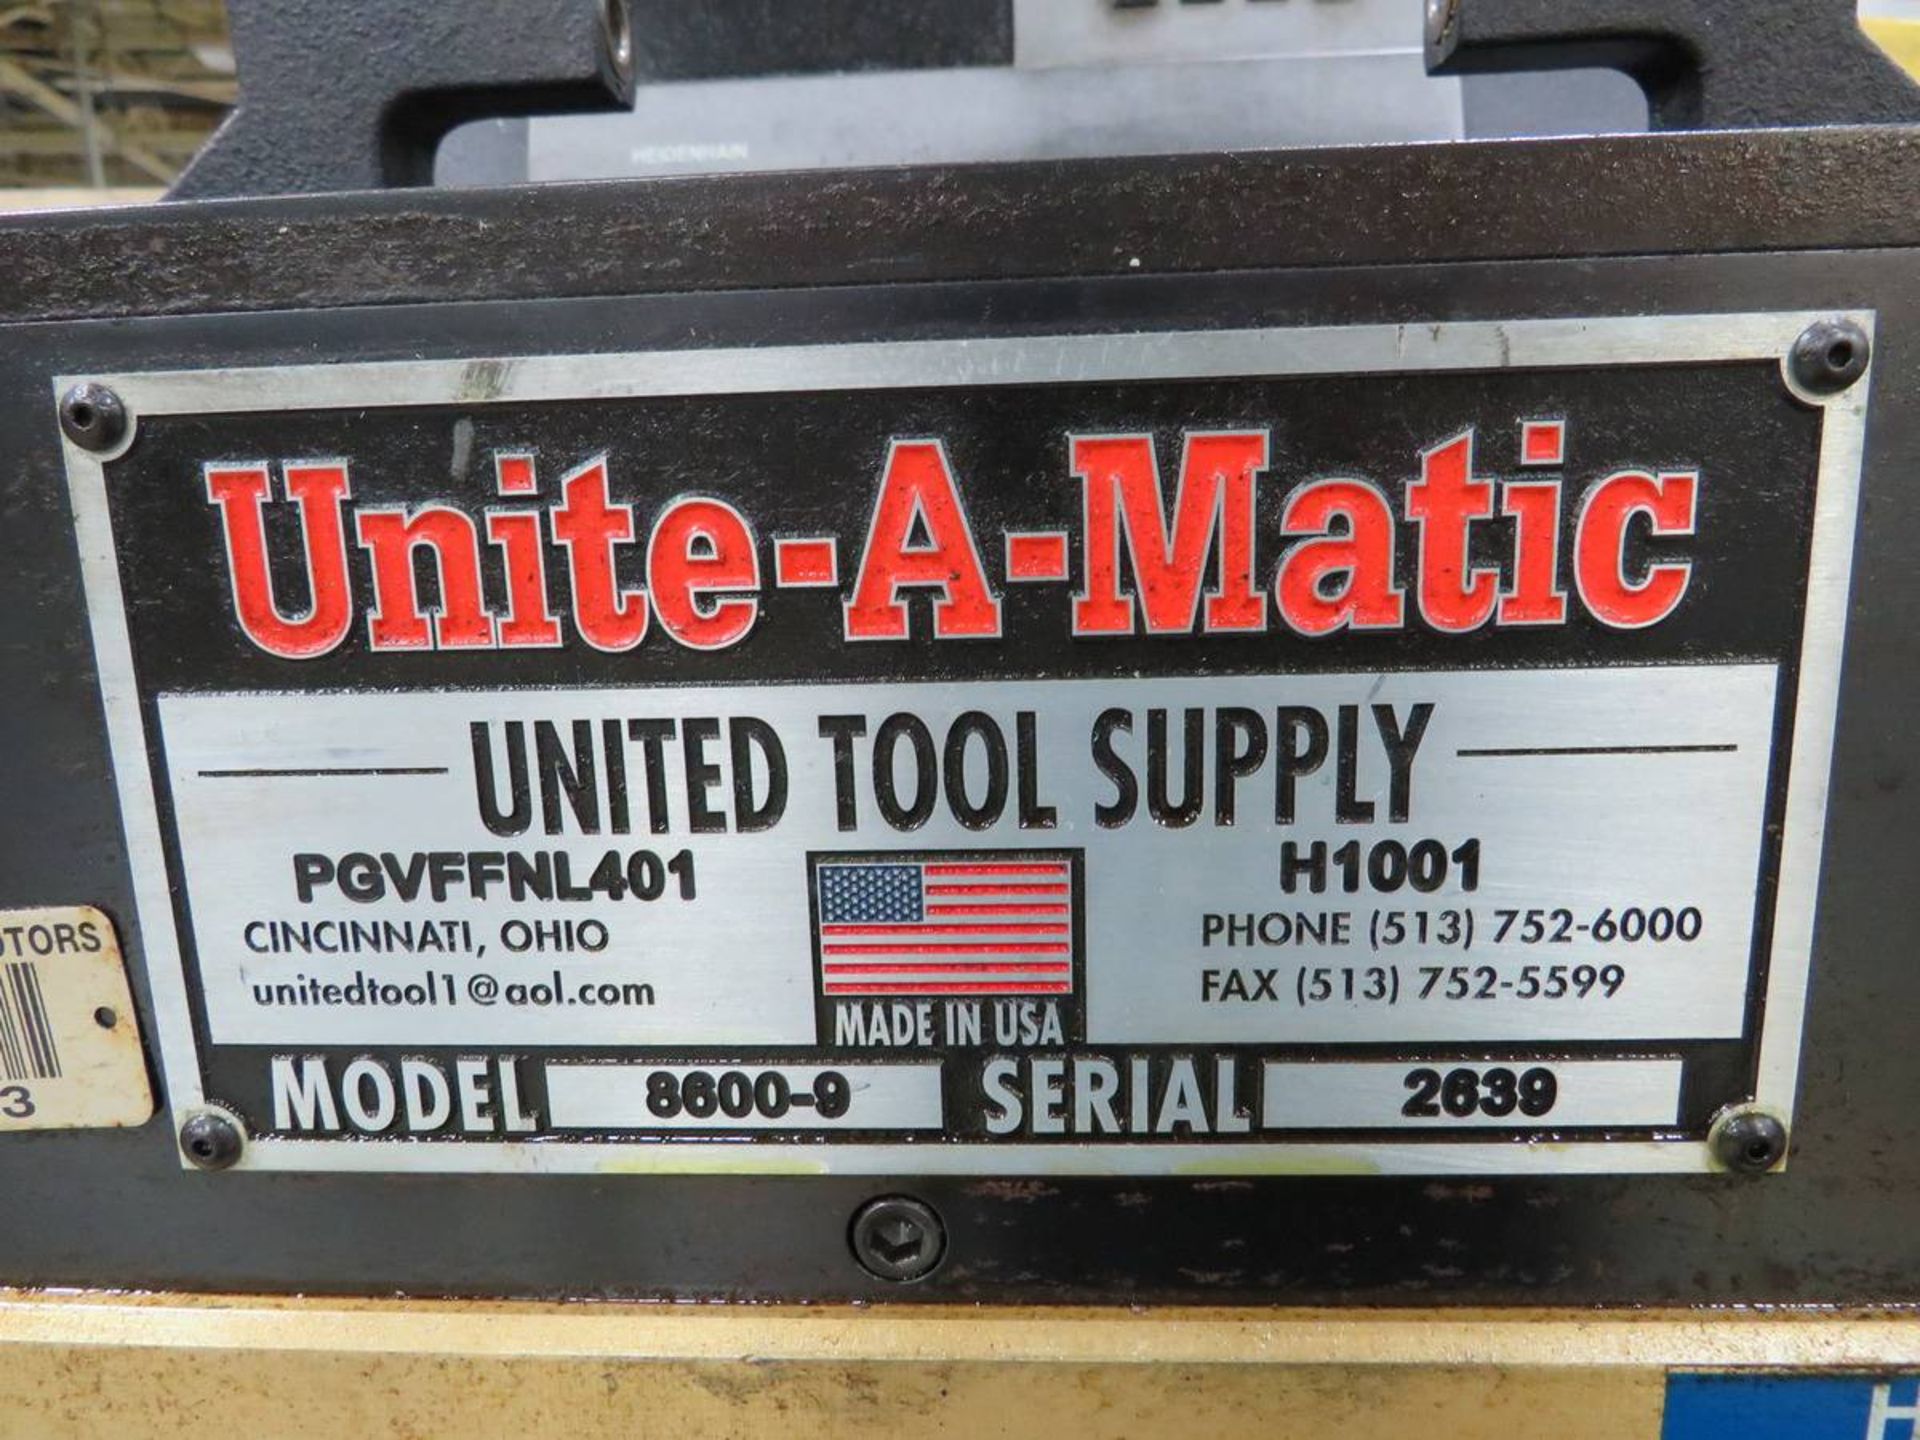 Unite-A-Matic 2447370 Gear Inspection Machine - Image 4 of 5